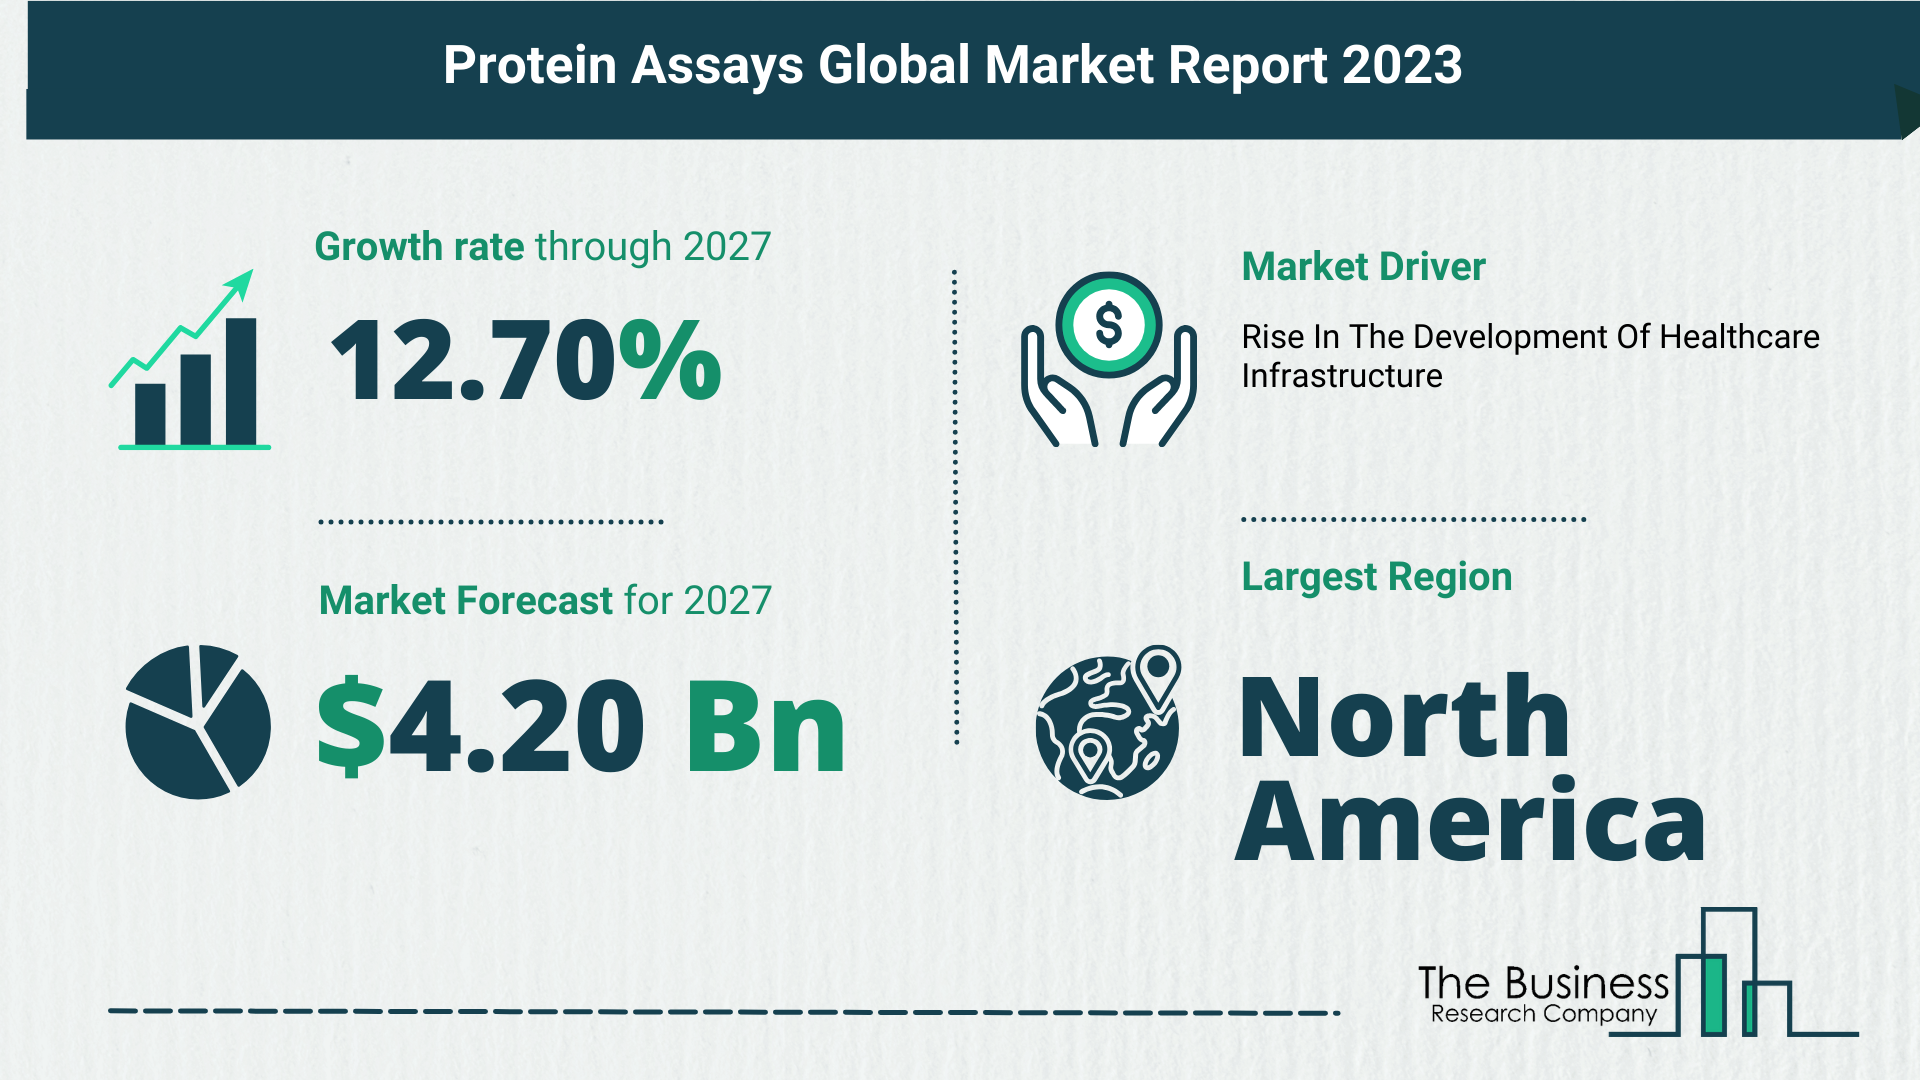 How Will The Protein Assays Market Size Grow In The Coming Years?